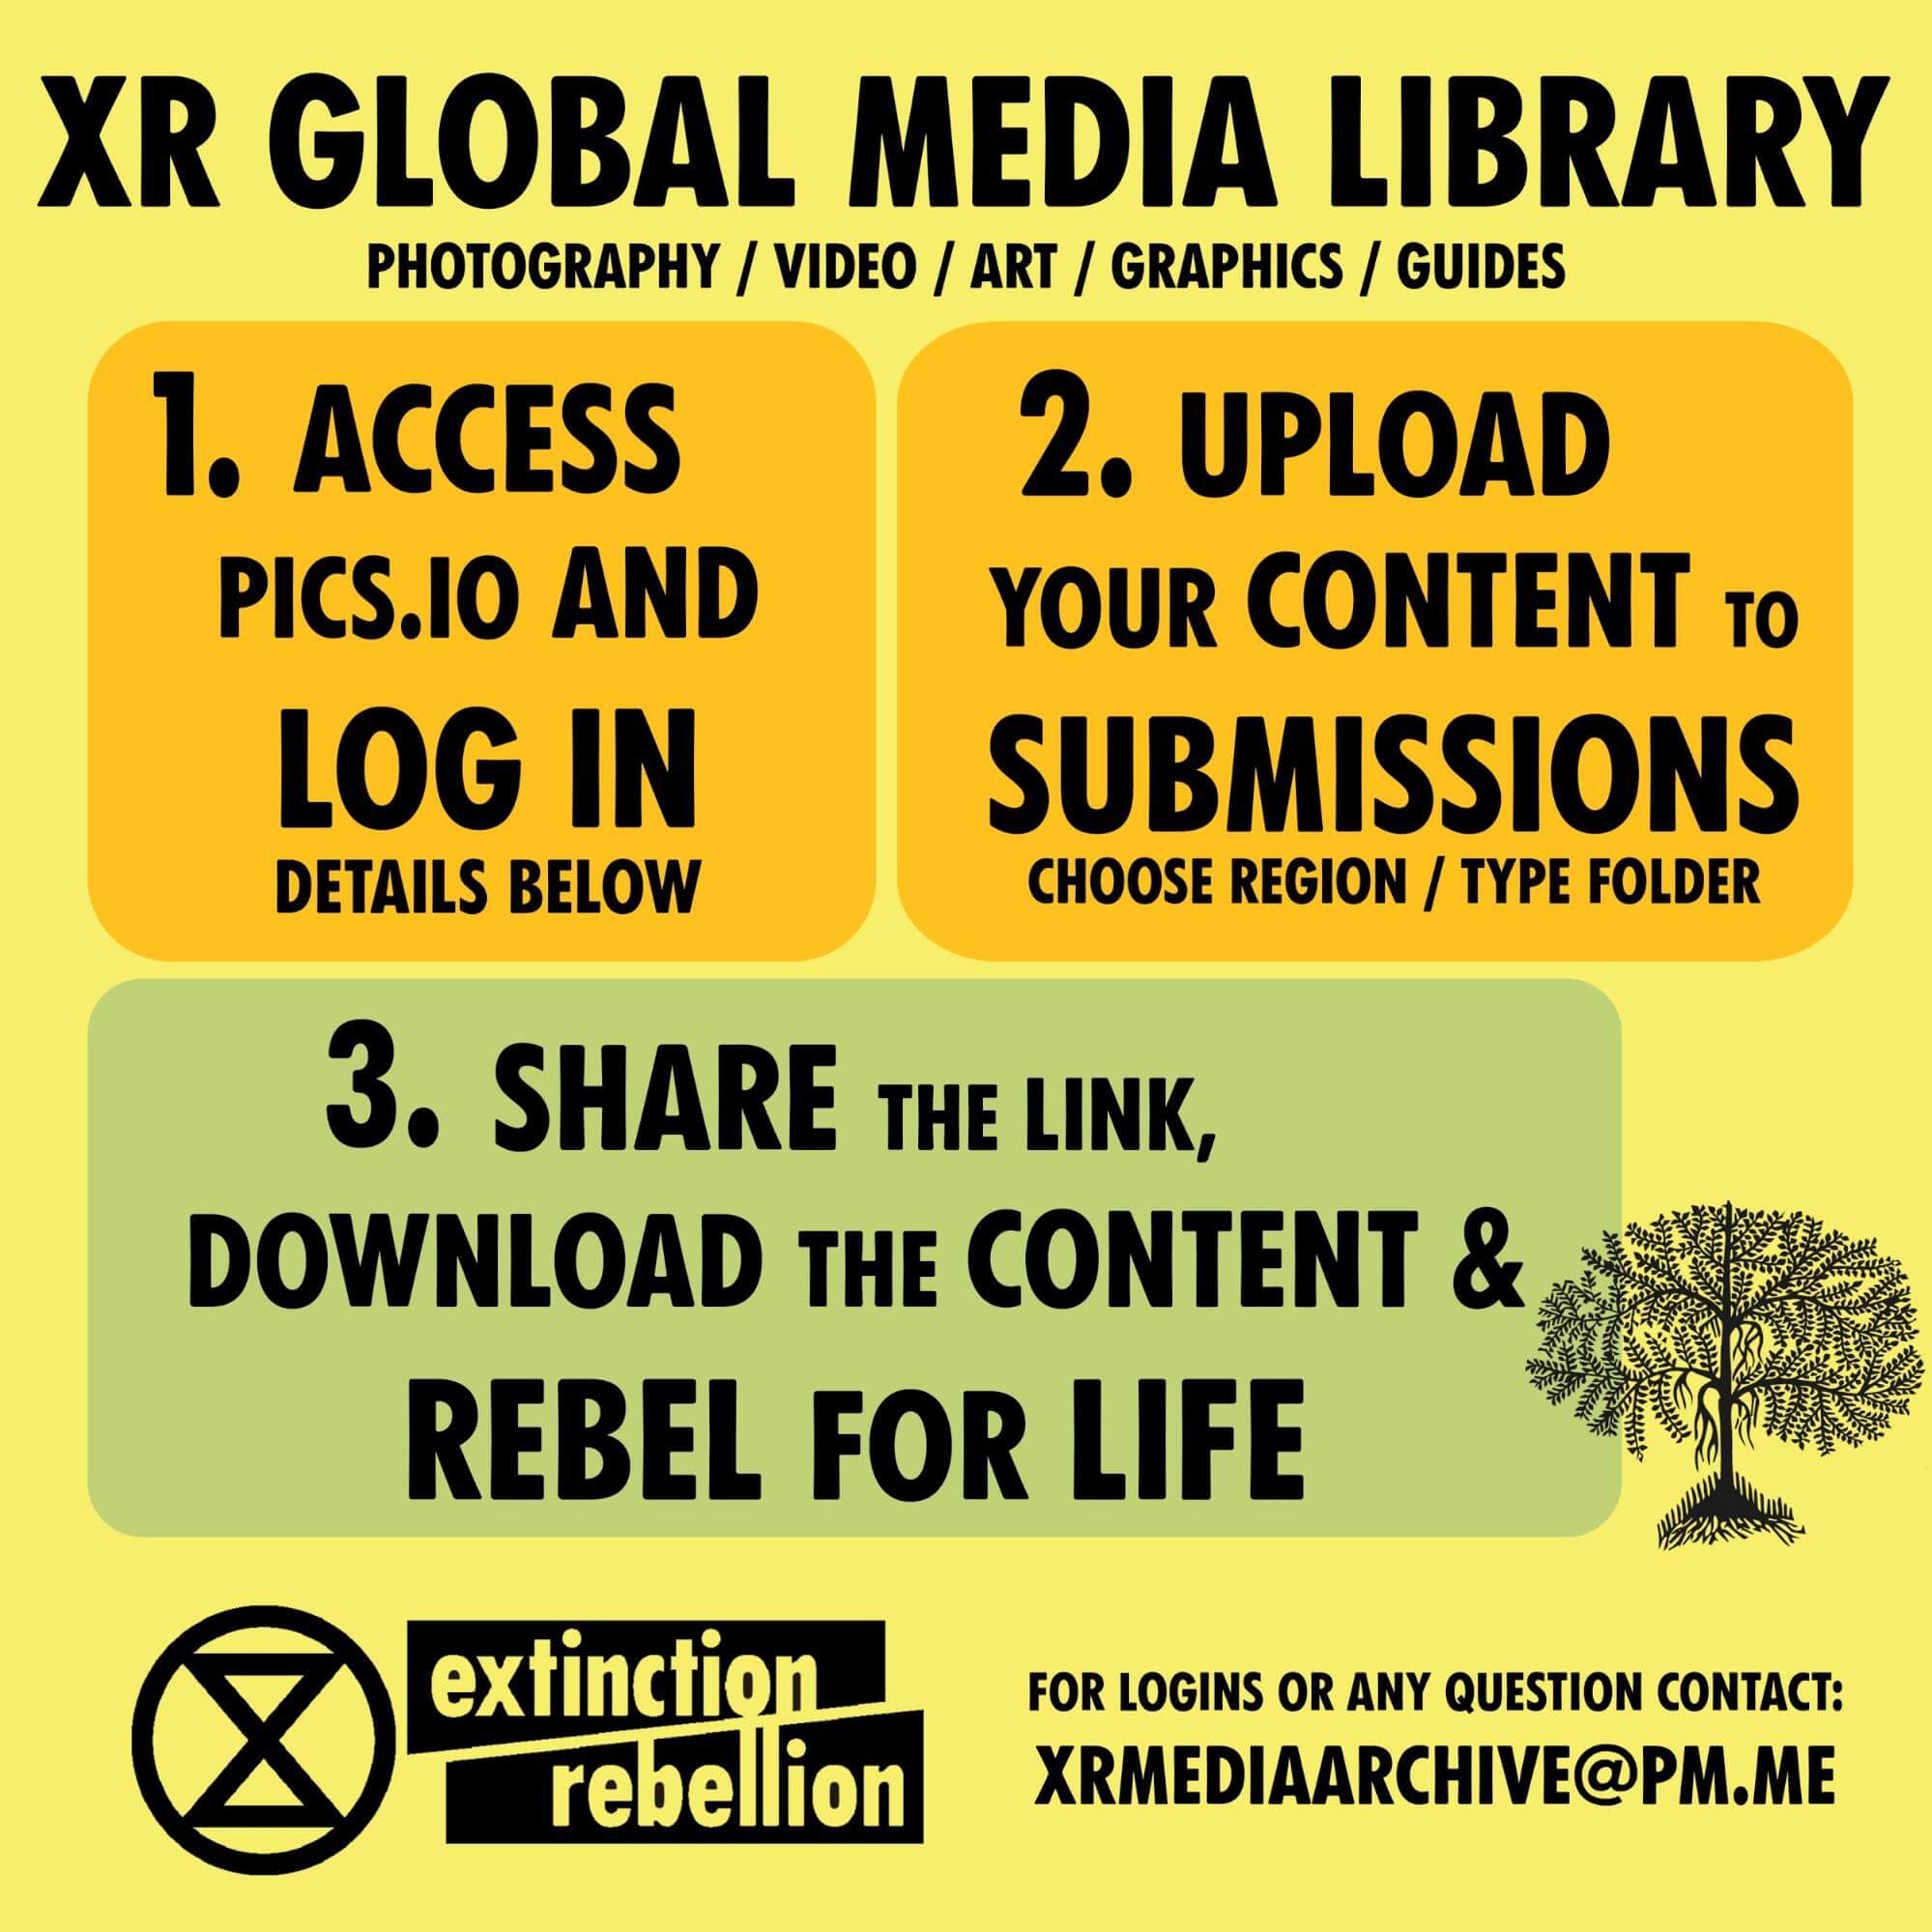 XR Global Media Library graphic. 